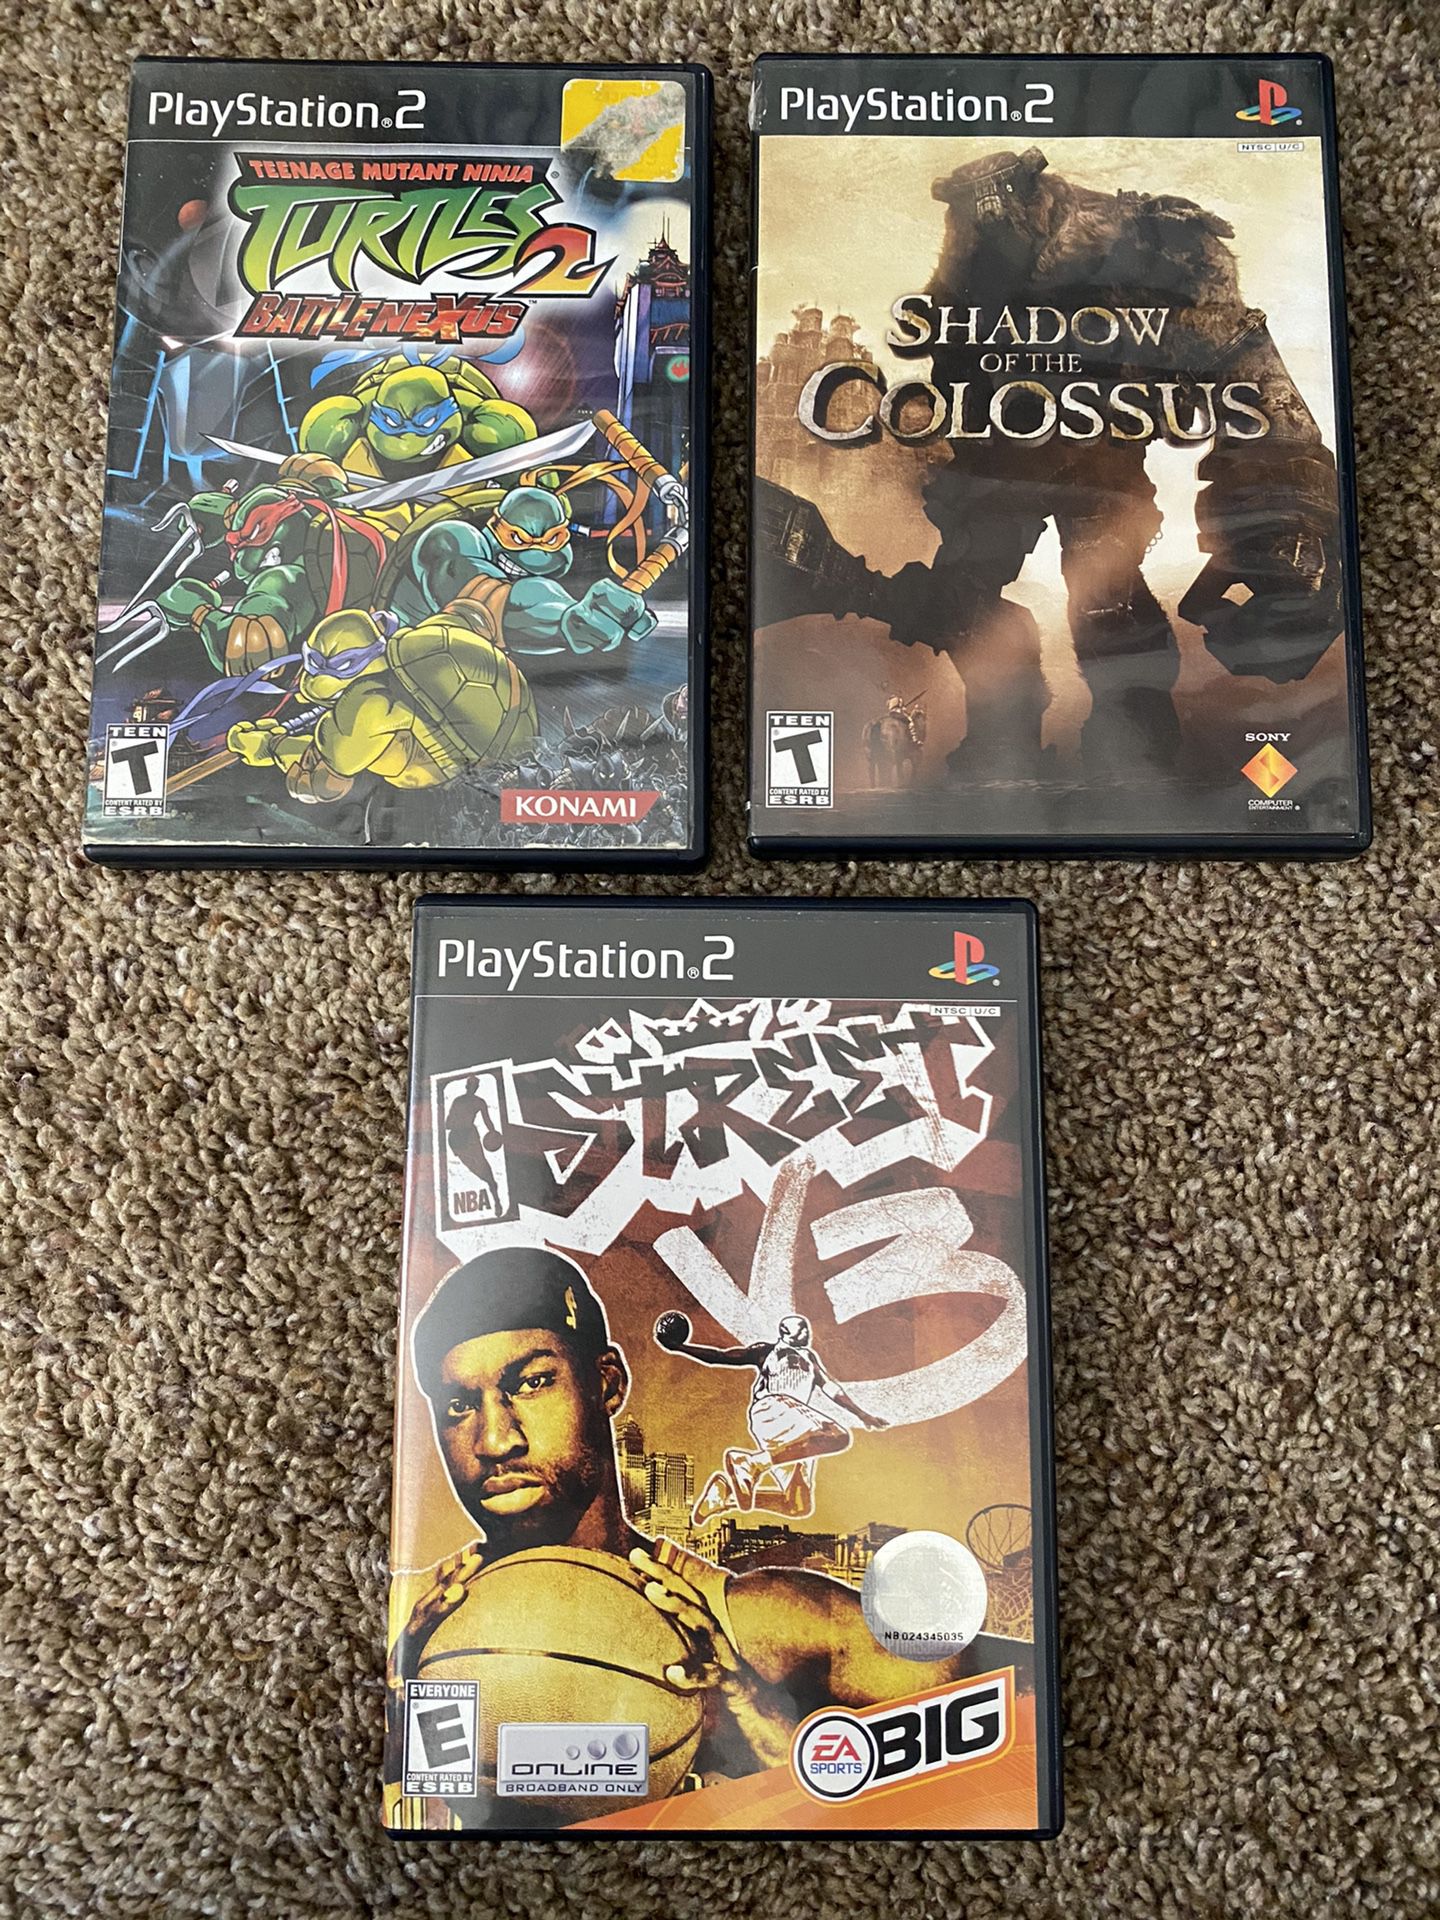 Ps2 games $20 each